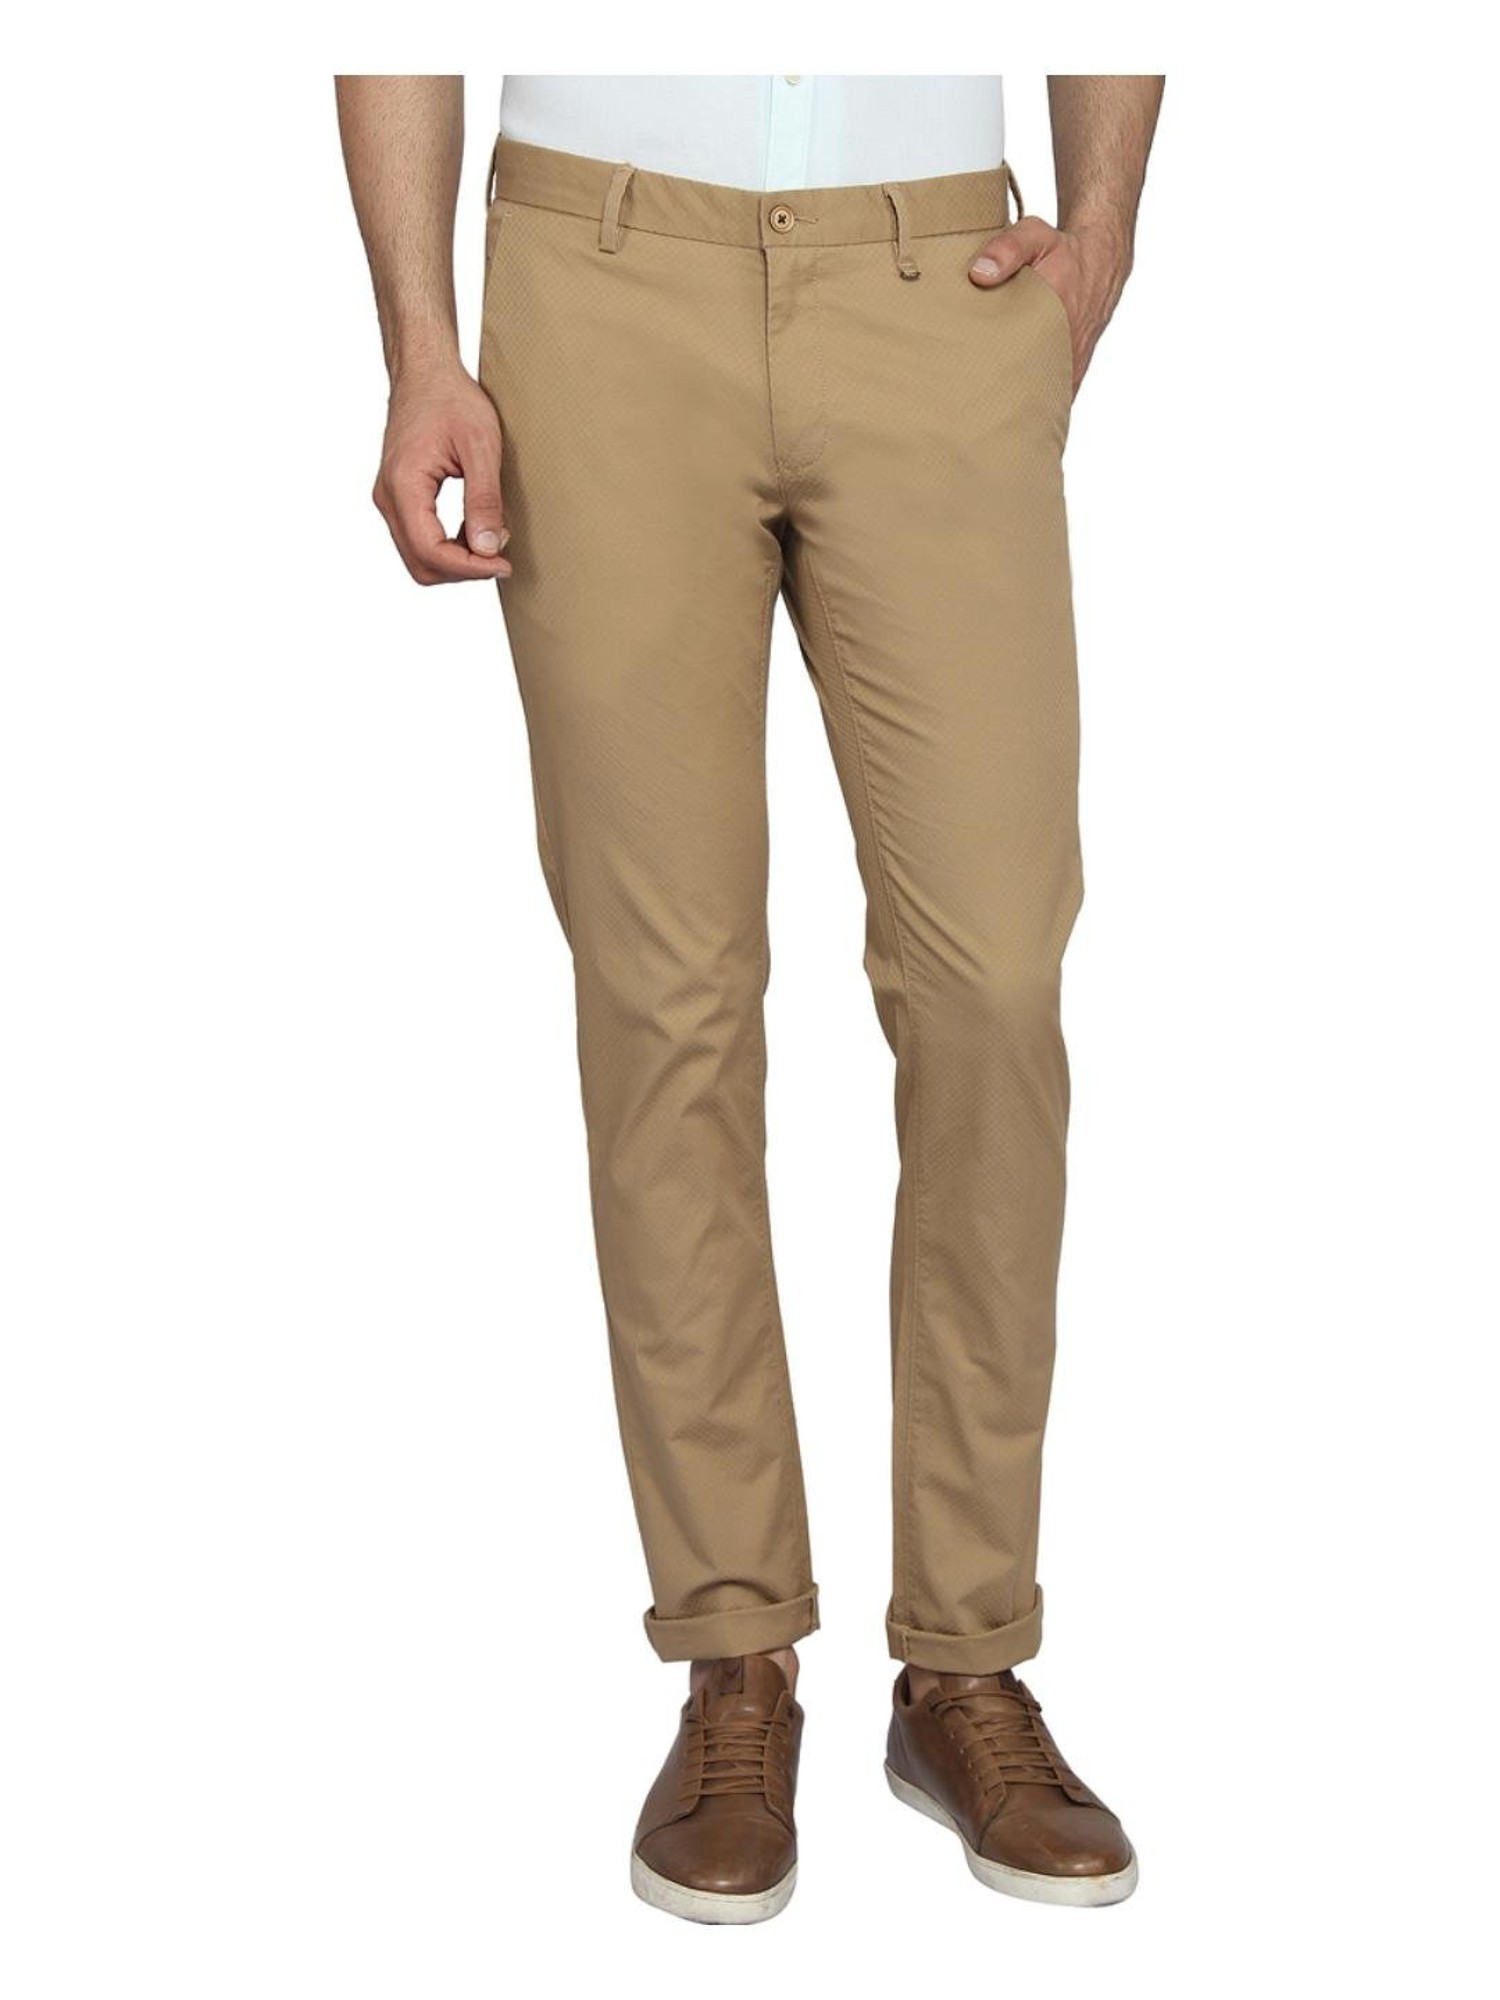 What is the meaning of 'chino pants'? - Quora